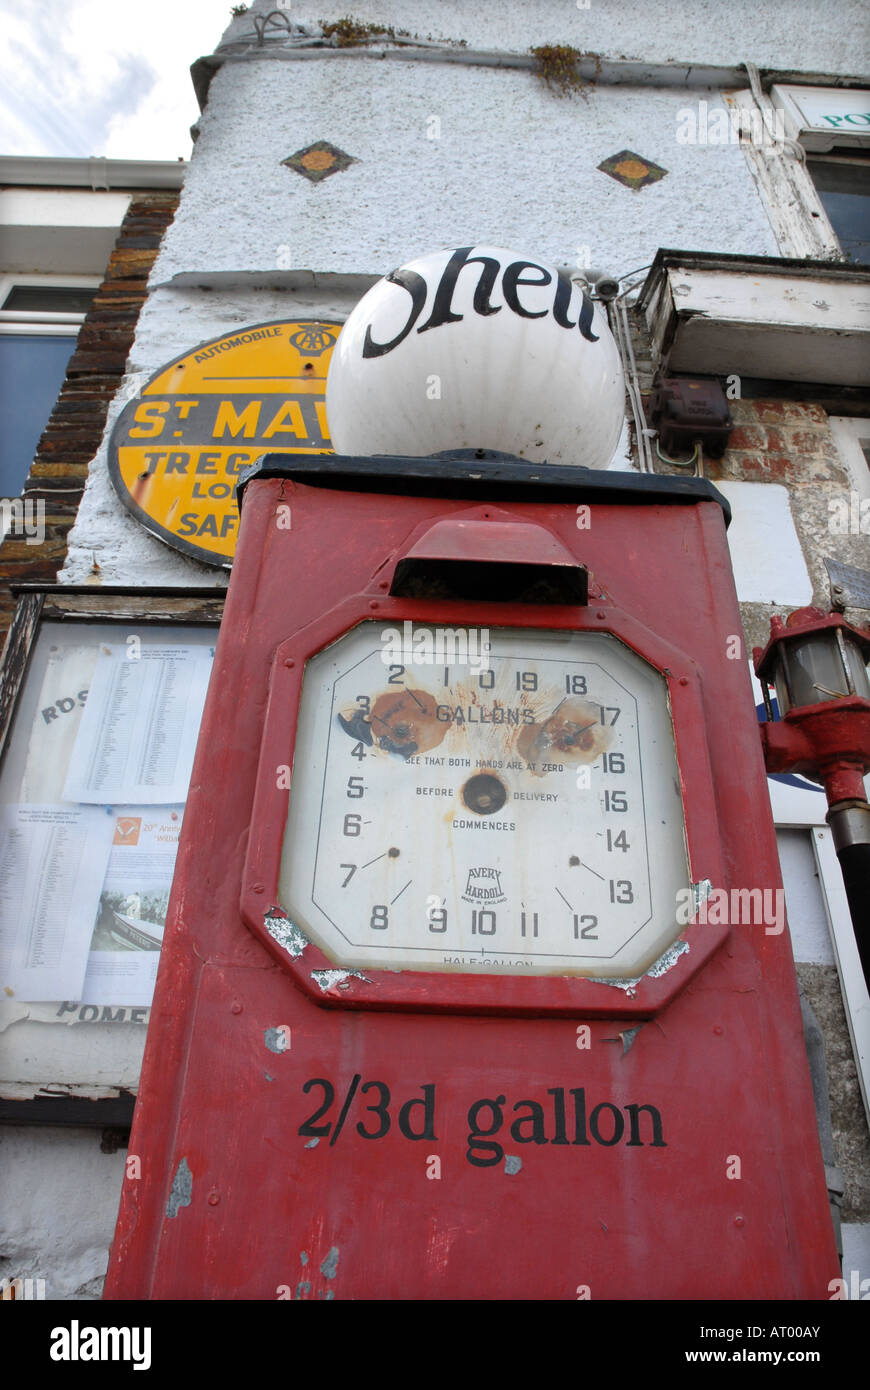 Photographer Howard Barlow - Disused petrol pumps in St Mawes, Cornwall Stock Photo